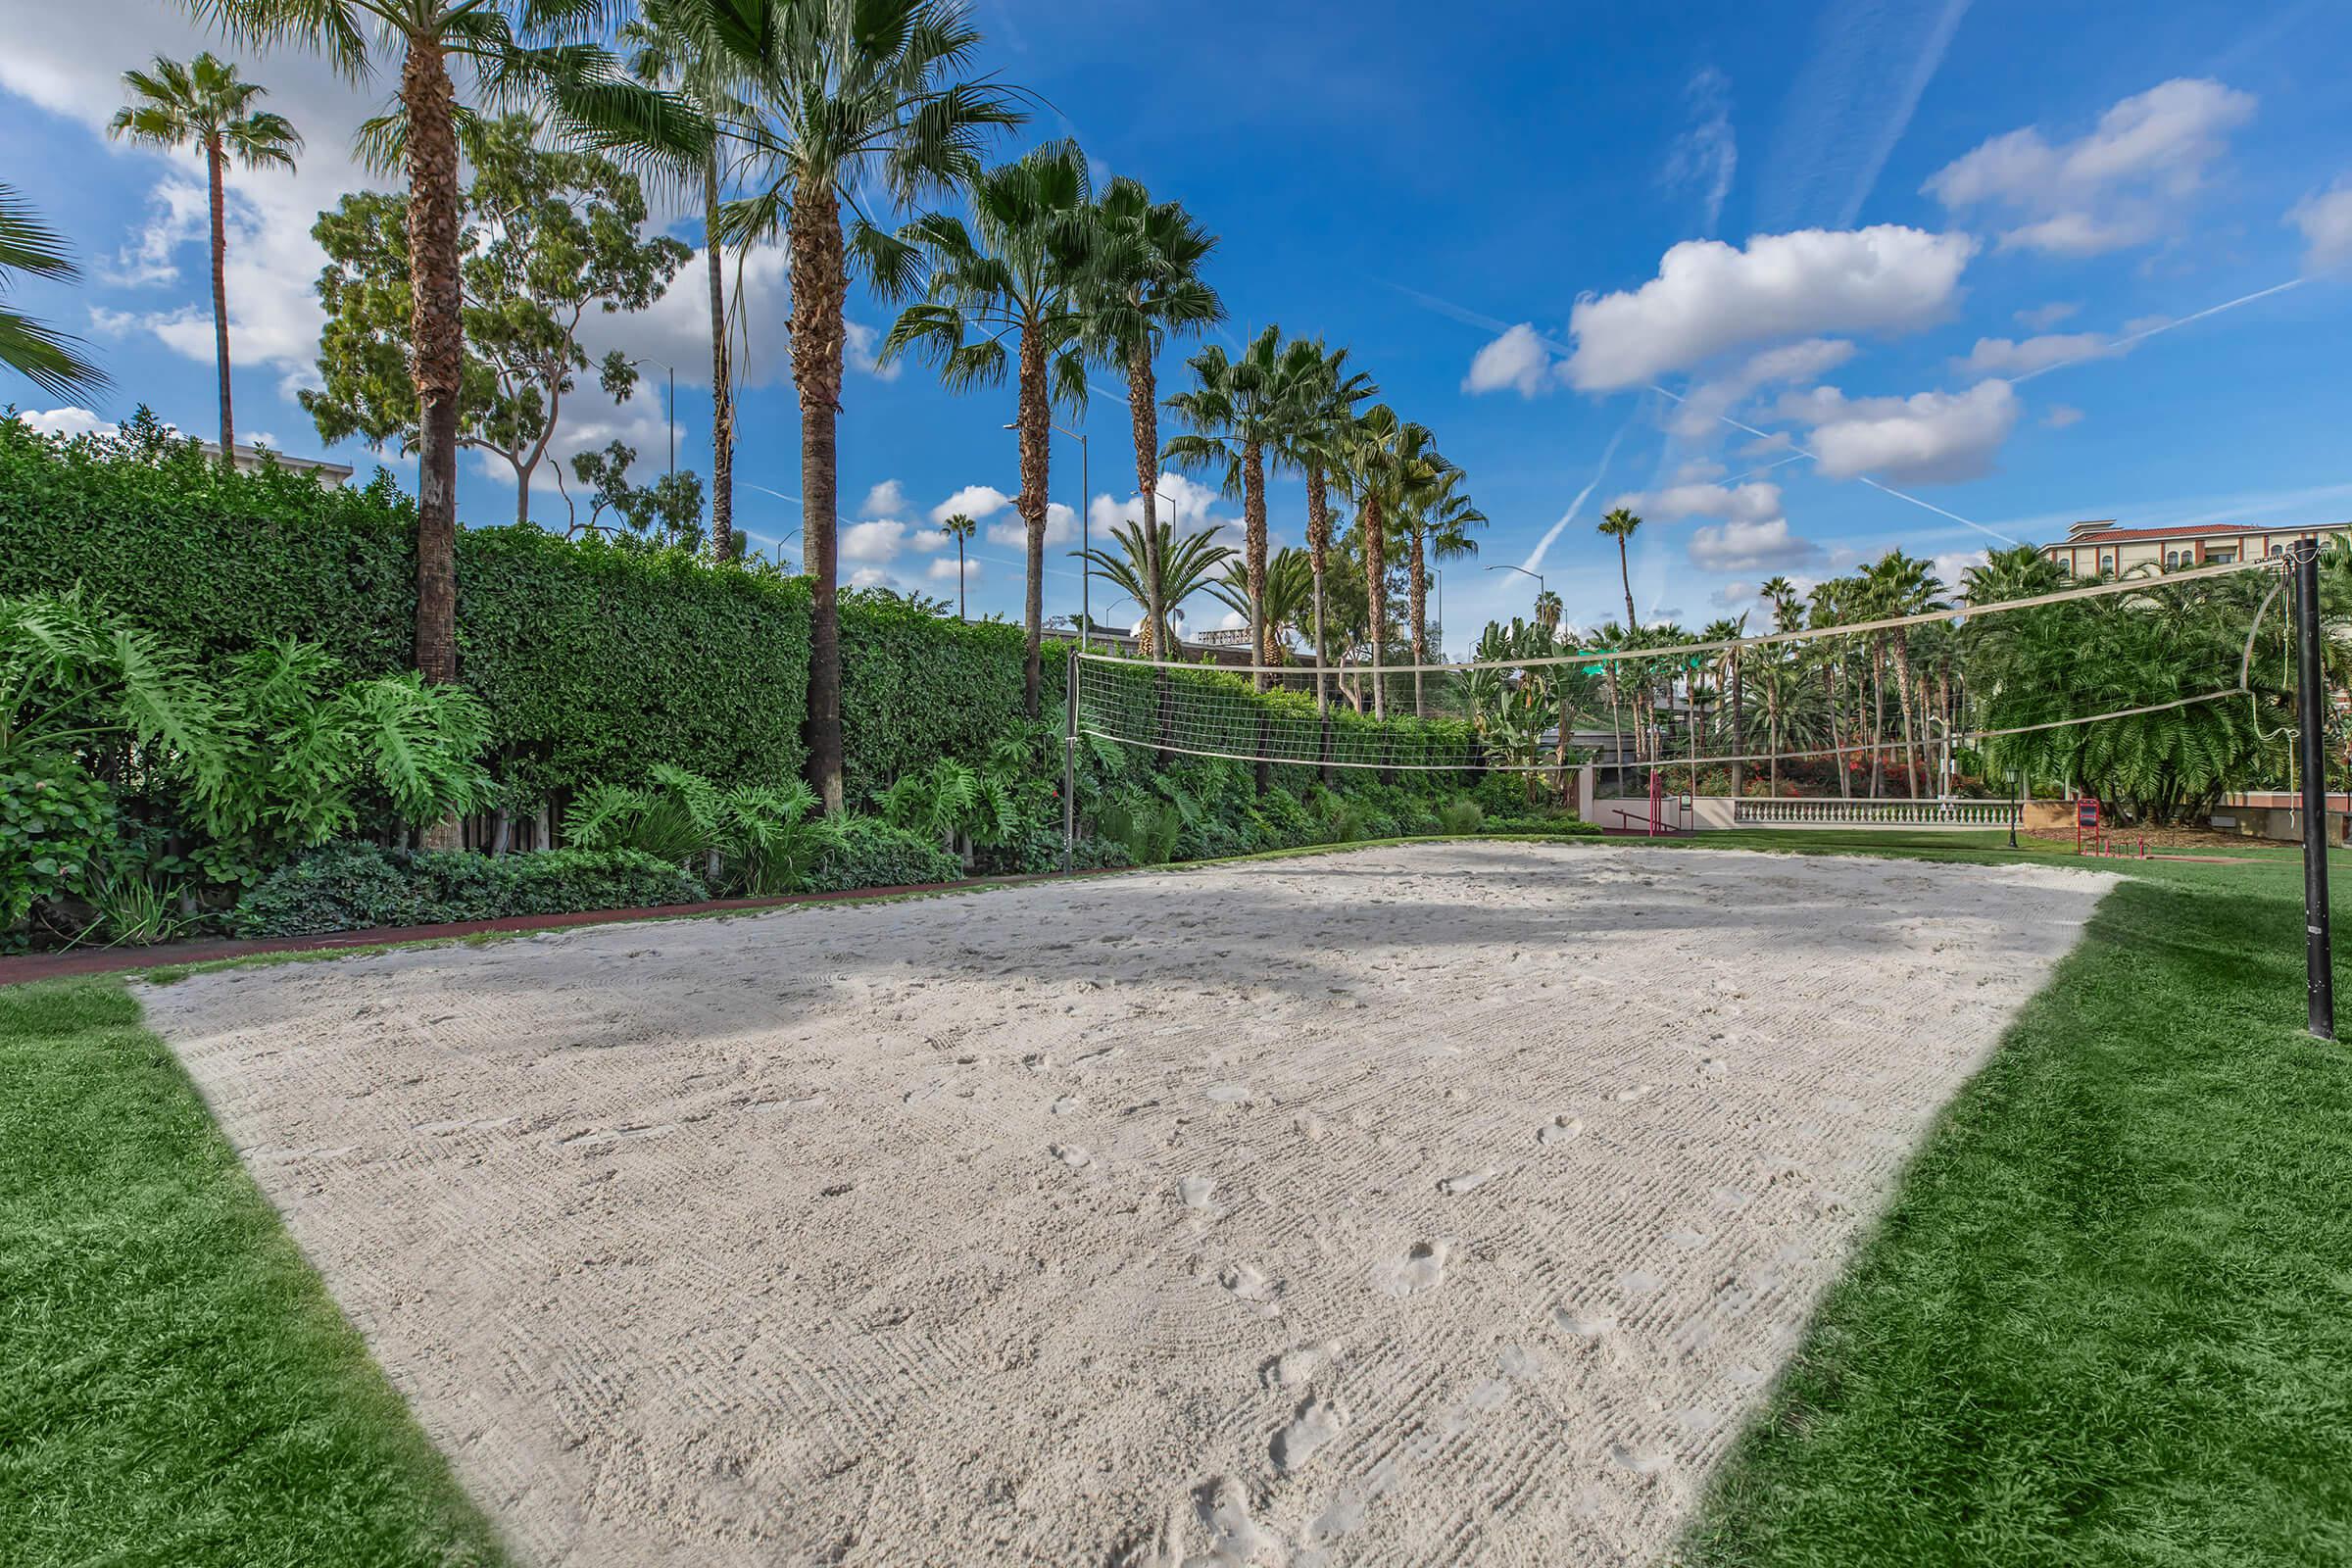 volleyball court with sand